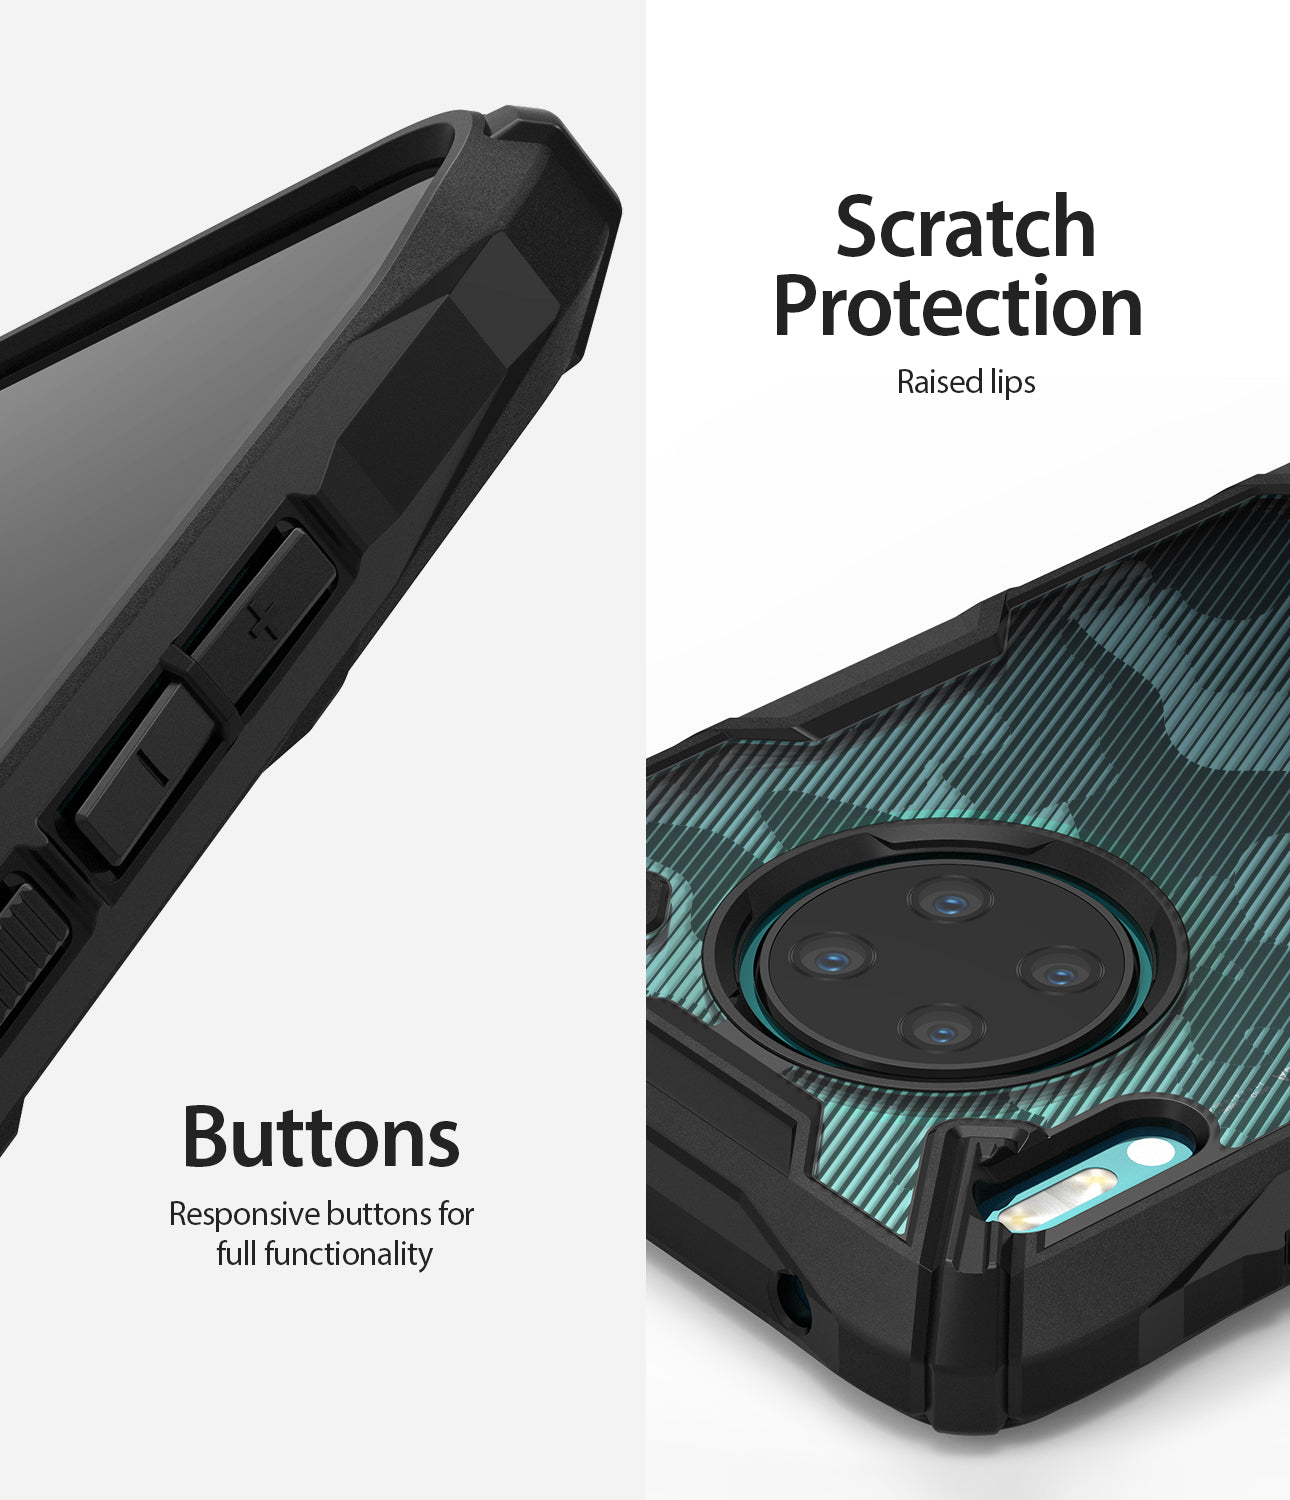 scratch resistant with responsive buttons